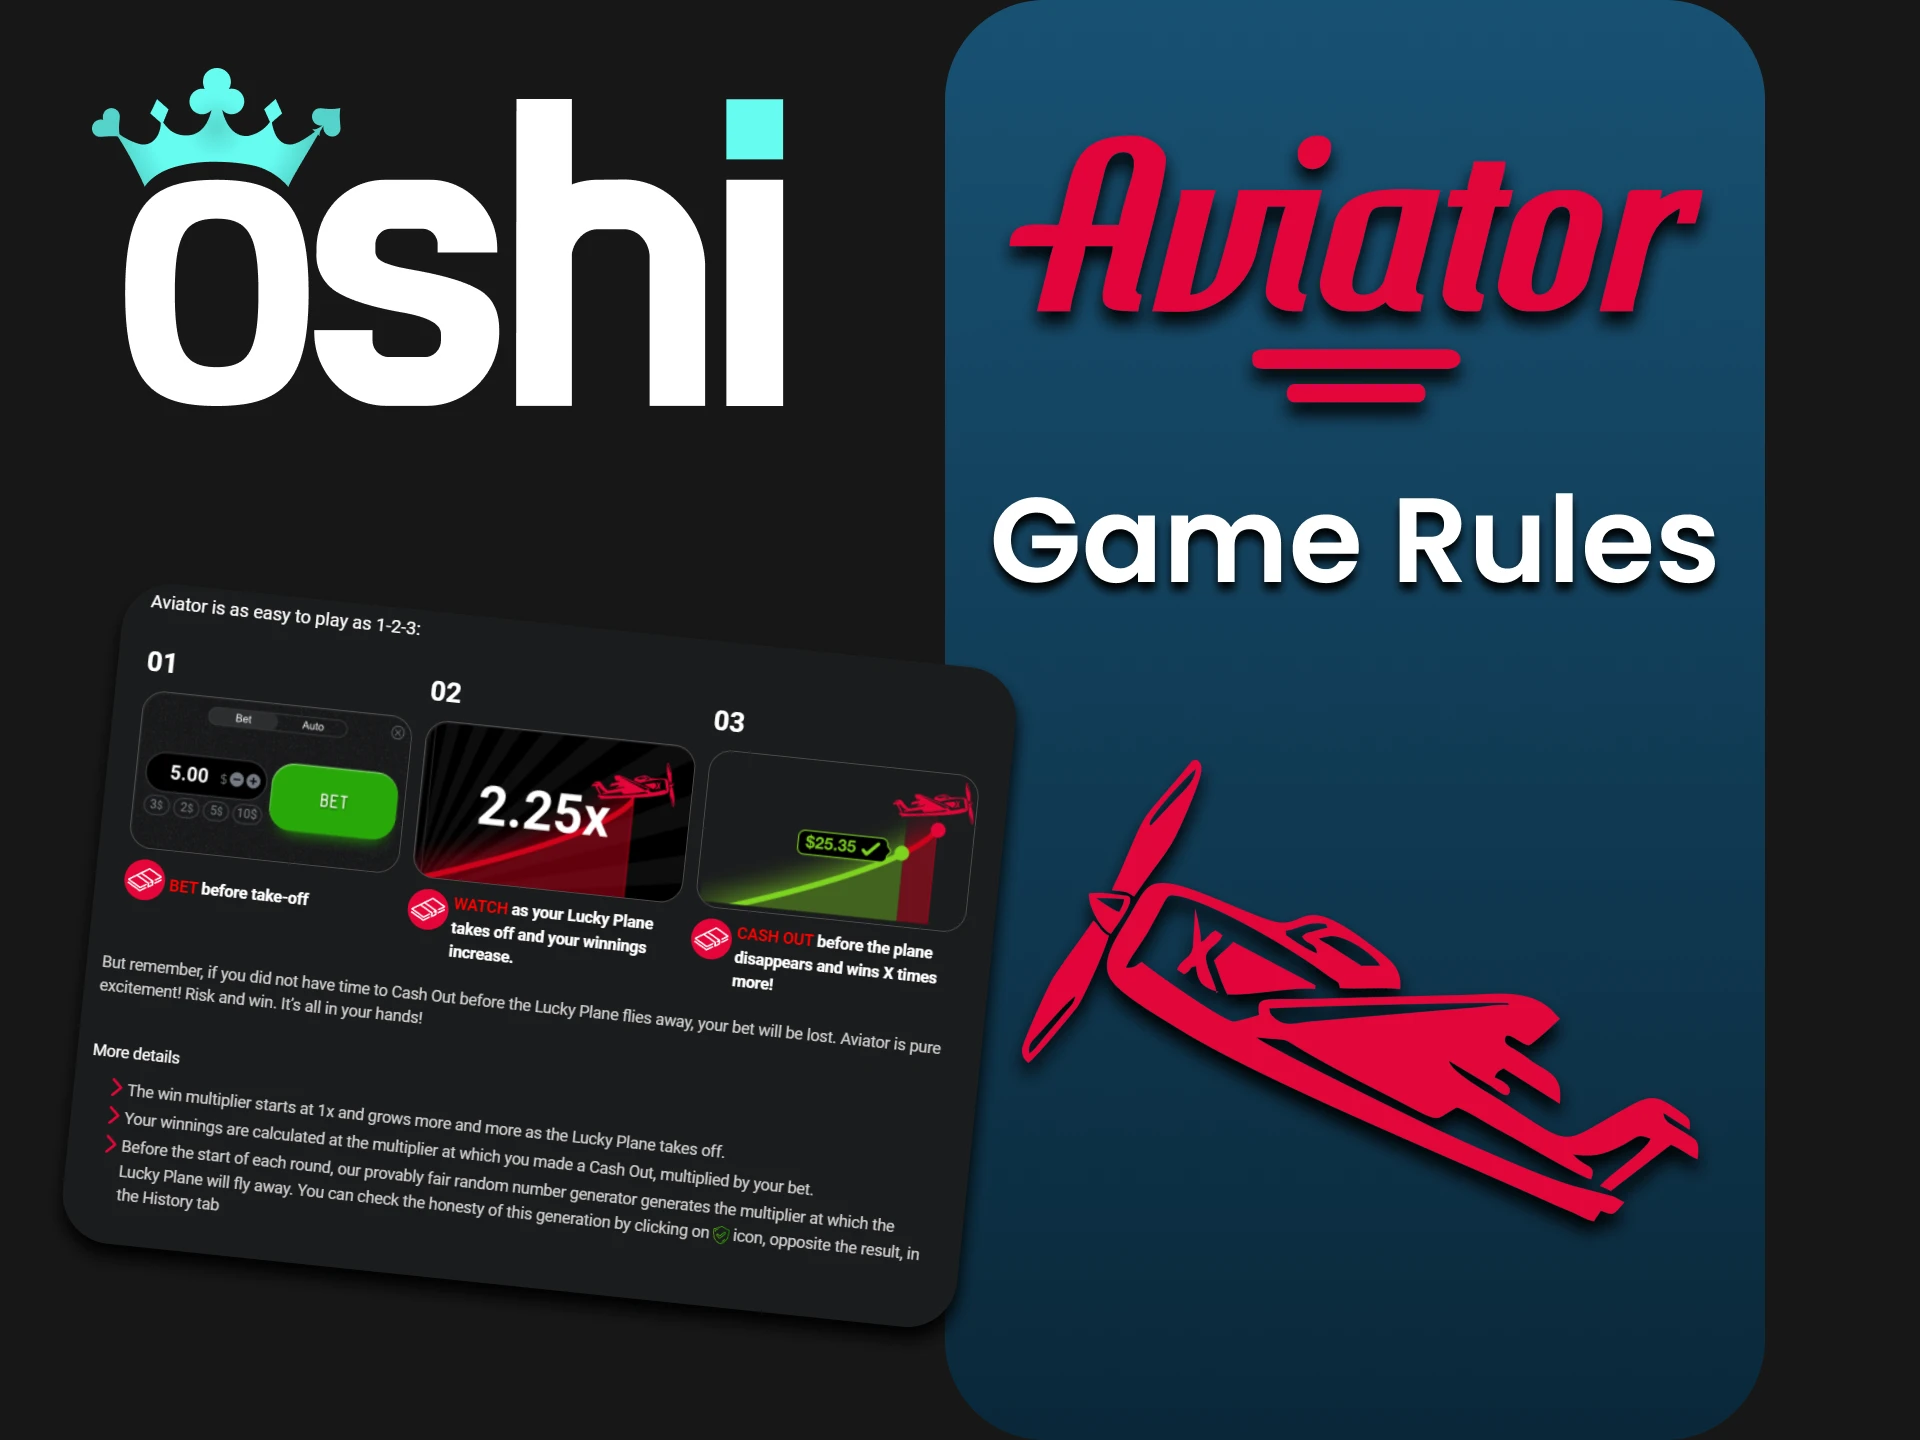 Carefully study the rules of the Aviator game at Oshi Casino.